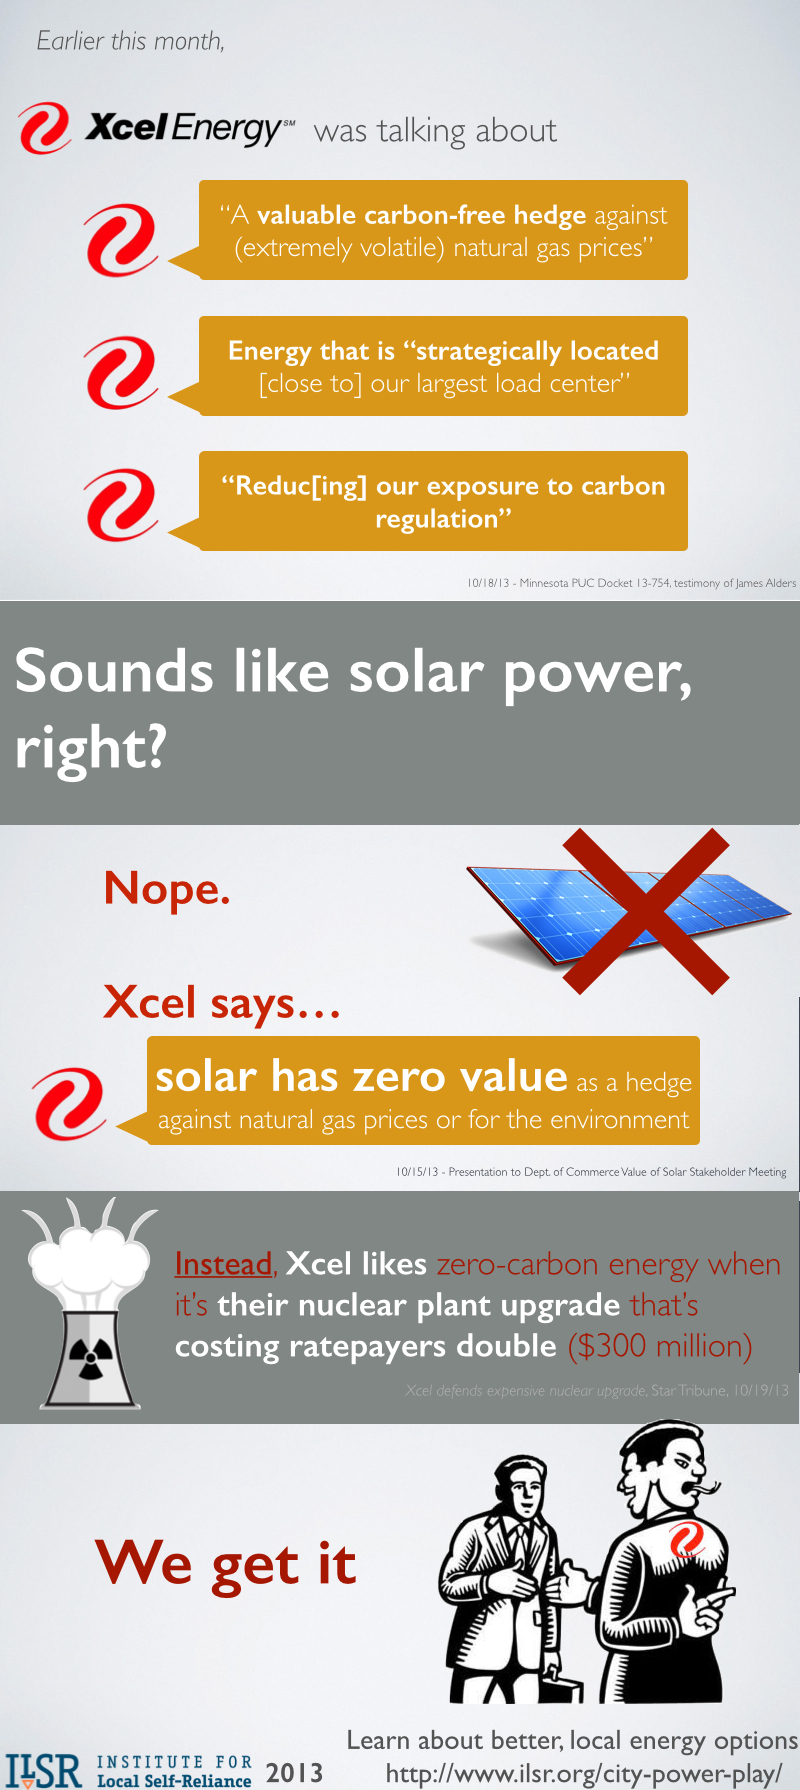 Xcel Two-Faced on Value of Solar Power